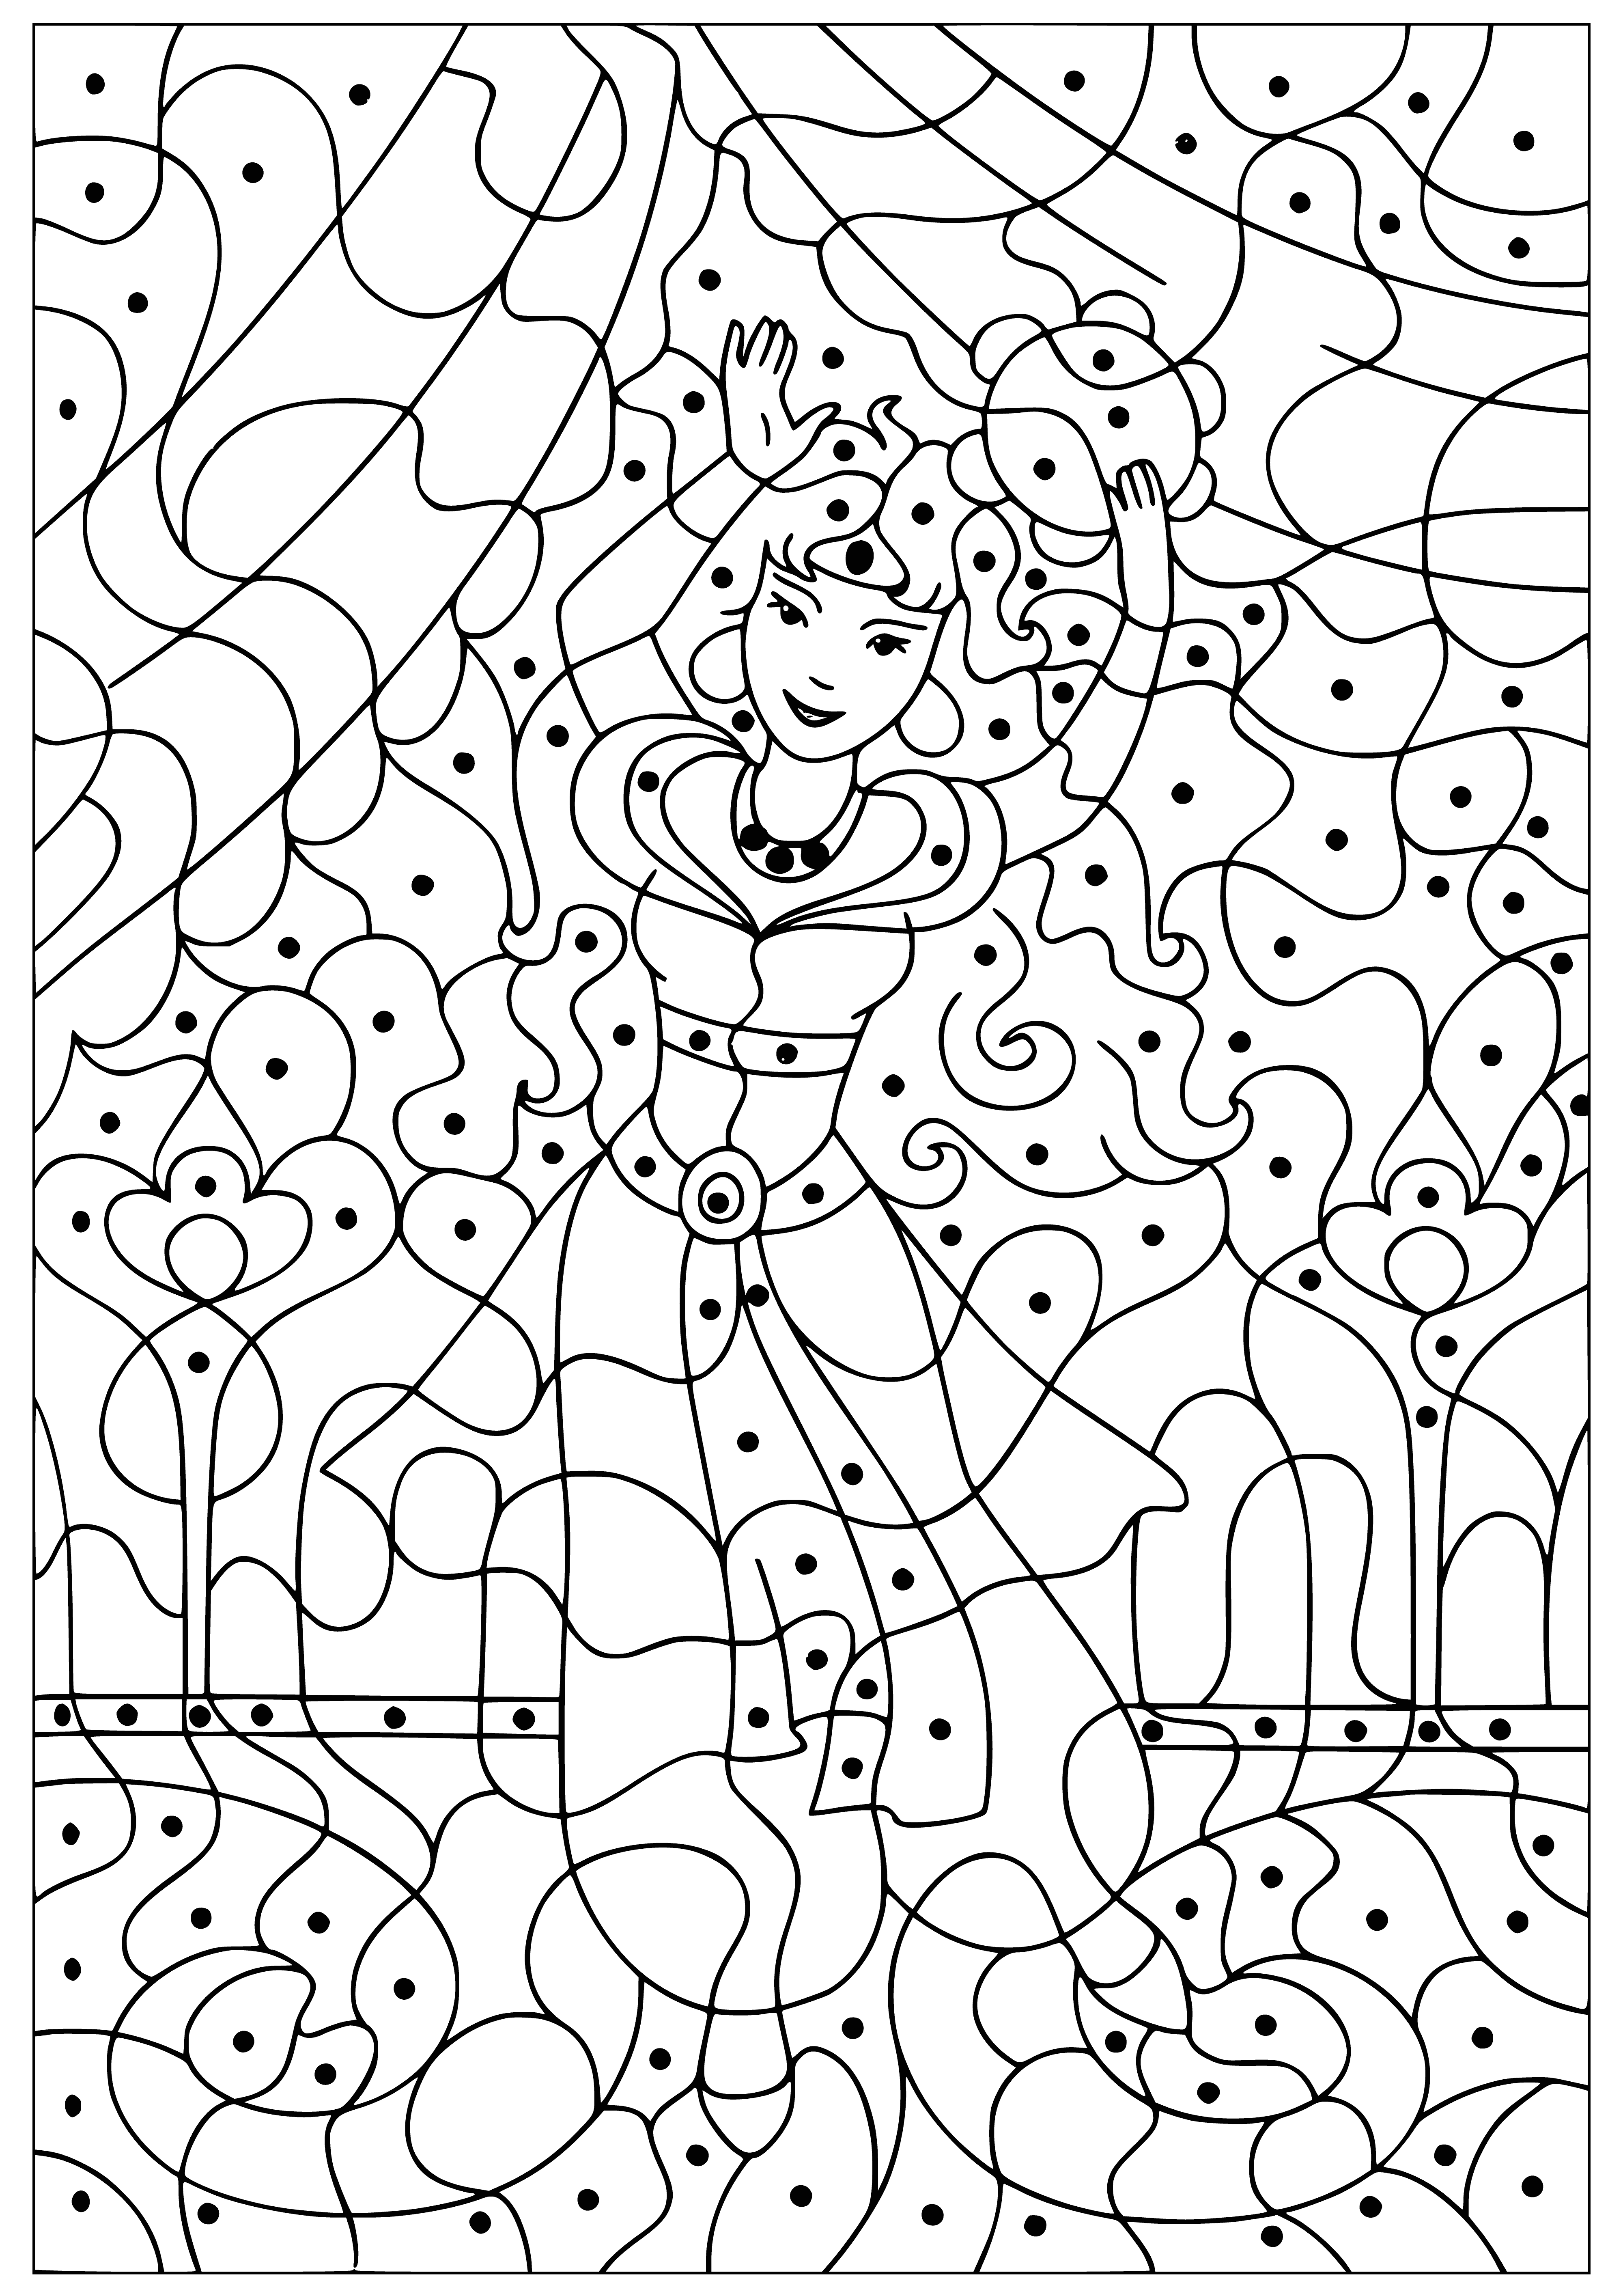 coloring page: Group of people dancing in a circle wearing colorful clothing, waving flags, and smiling. Having a good time!